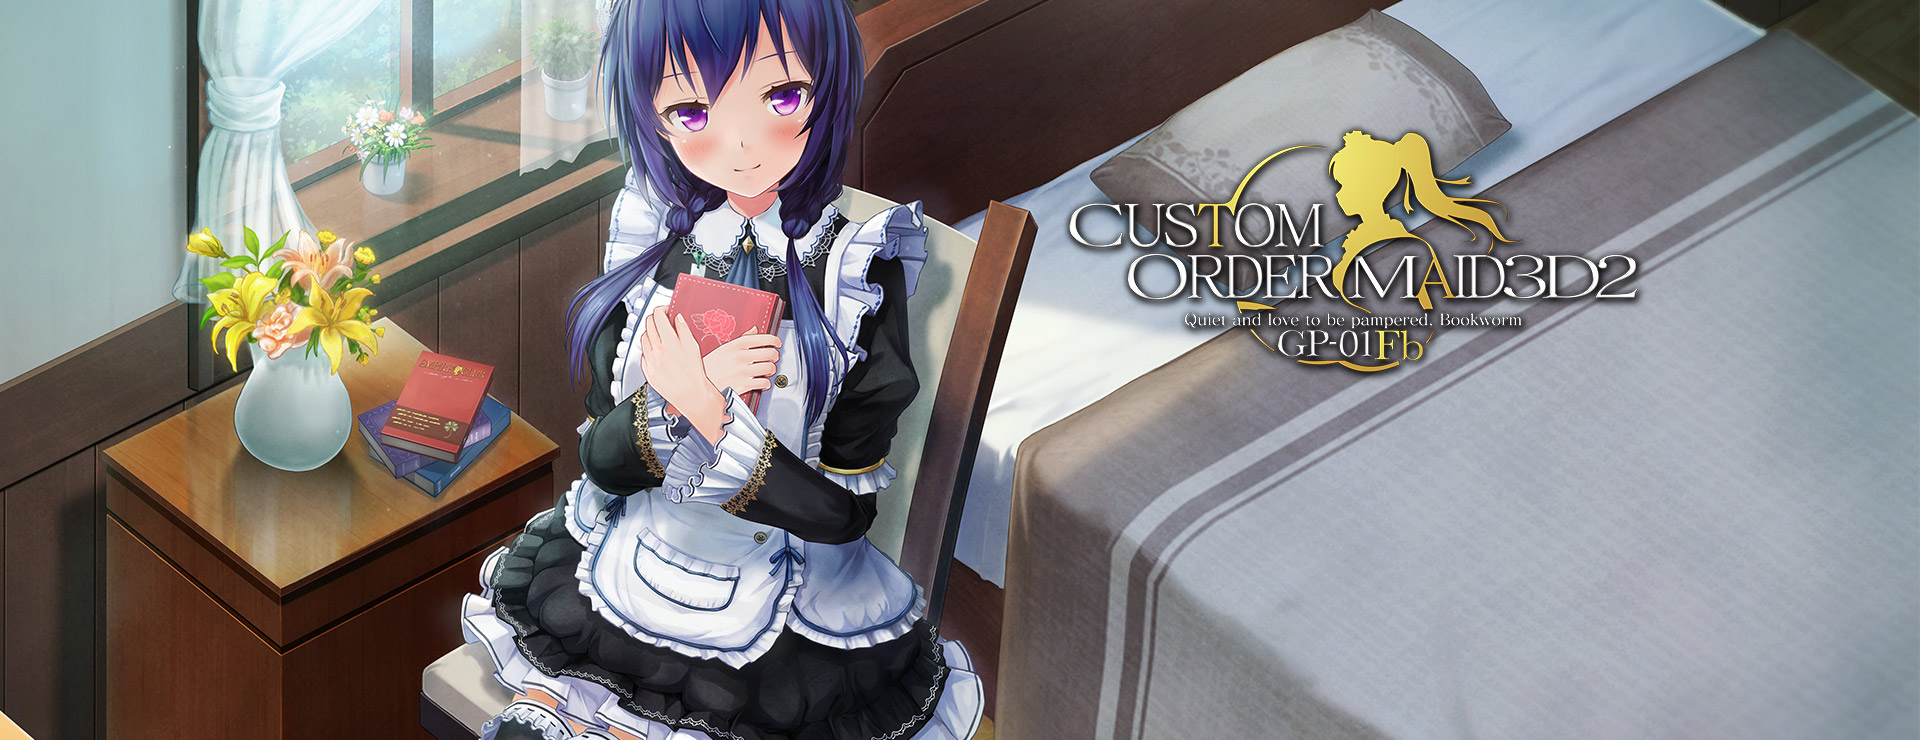 Custom Order Maid 3D2 - Quiet and love to be pampered Bookworm GP-01Fb DLC - Simulation Spiel